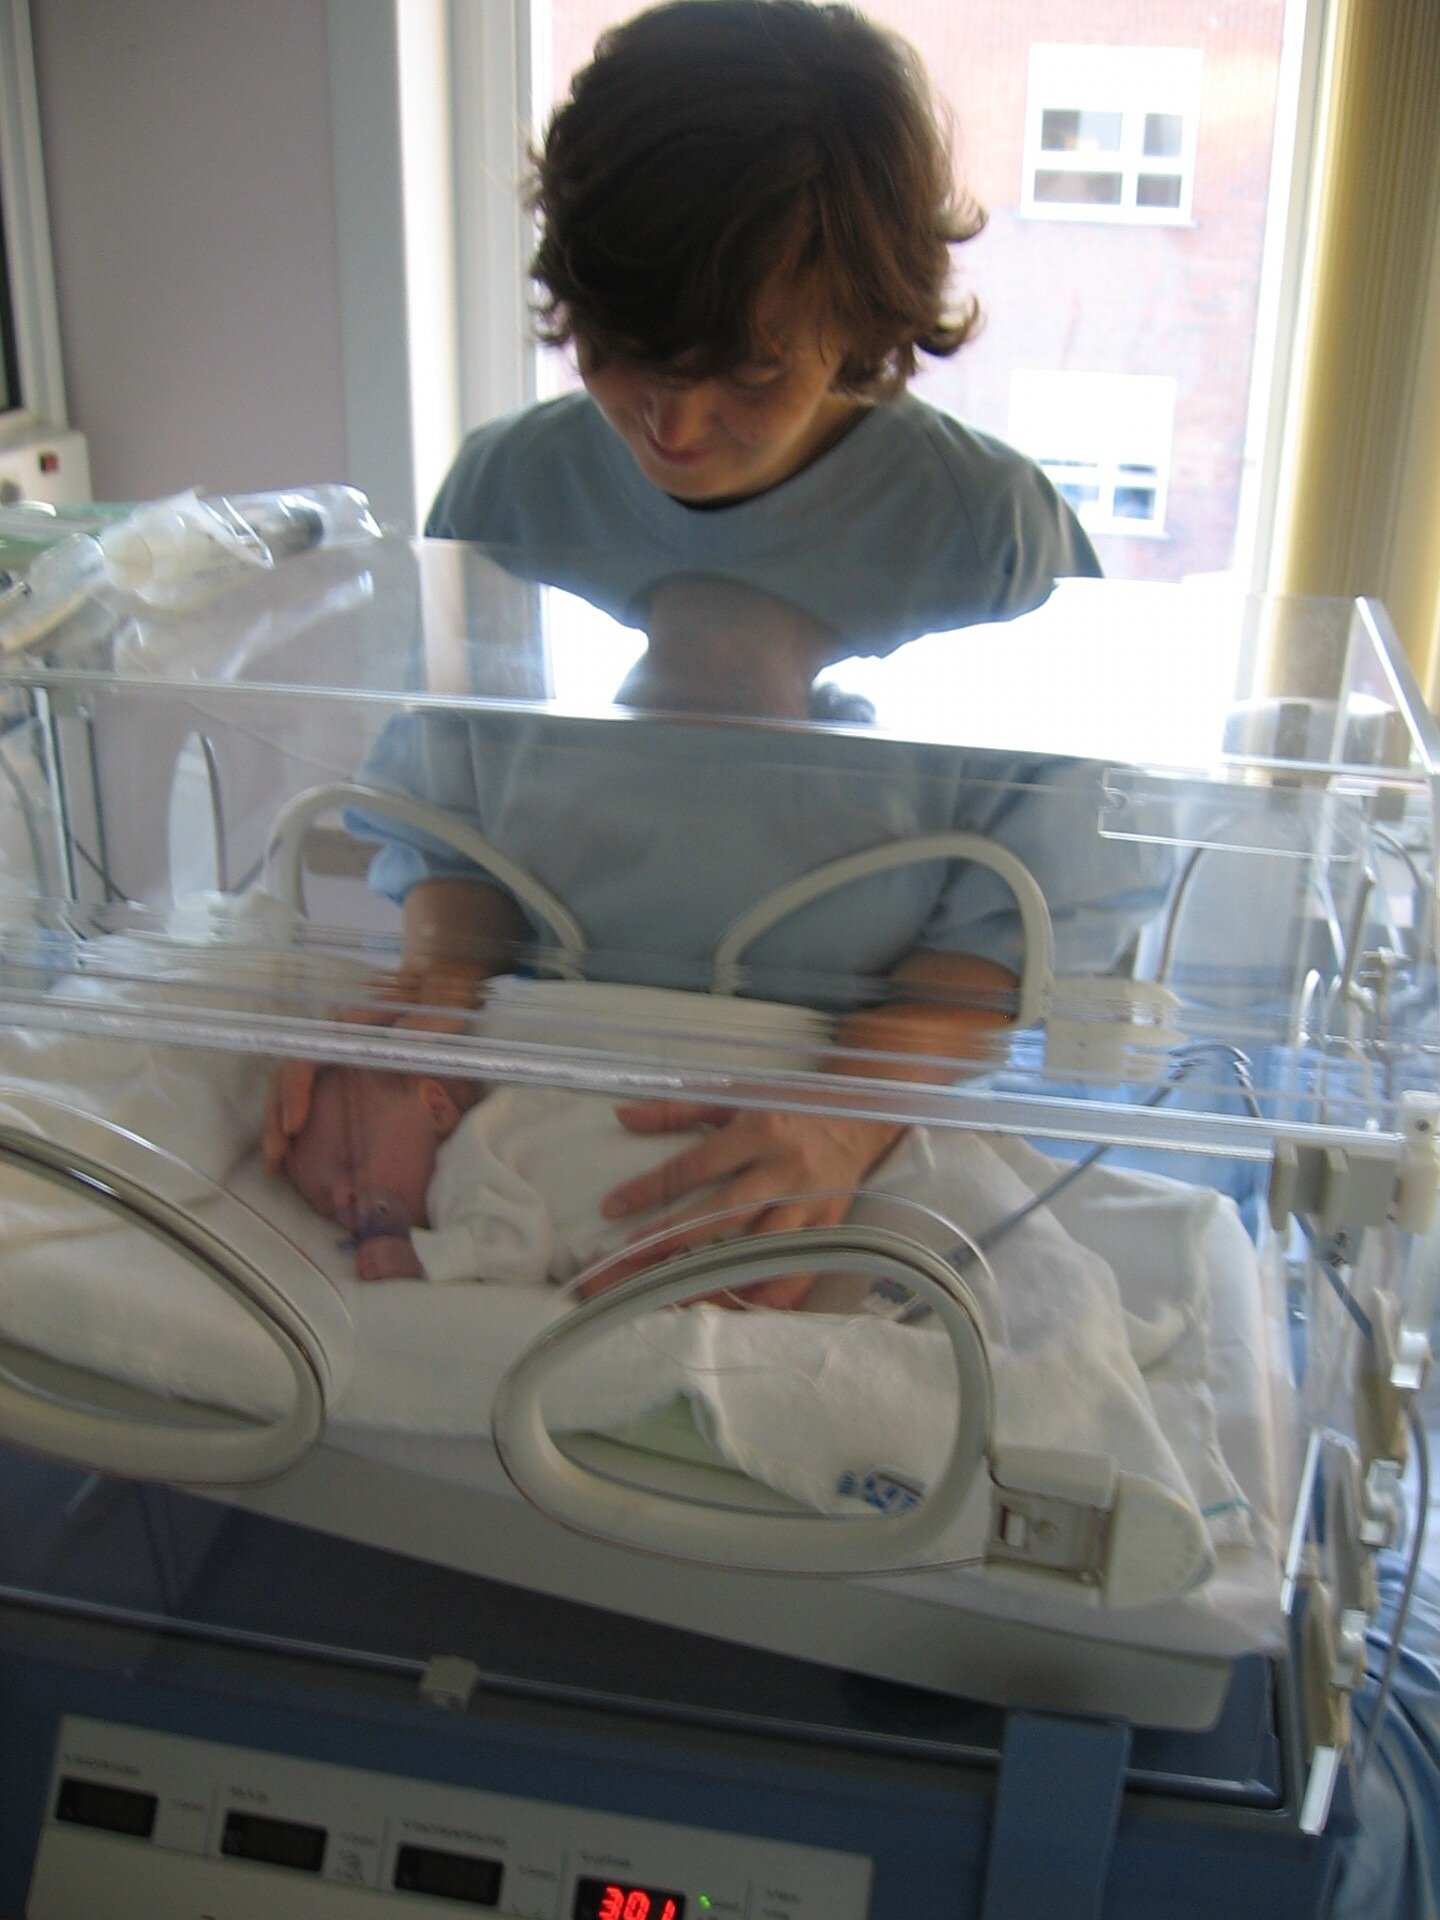 Clinical trial evaluates azithromycin for preventing chronic lung disease in premature babies